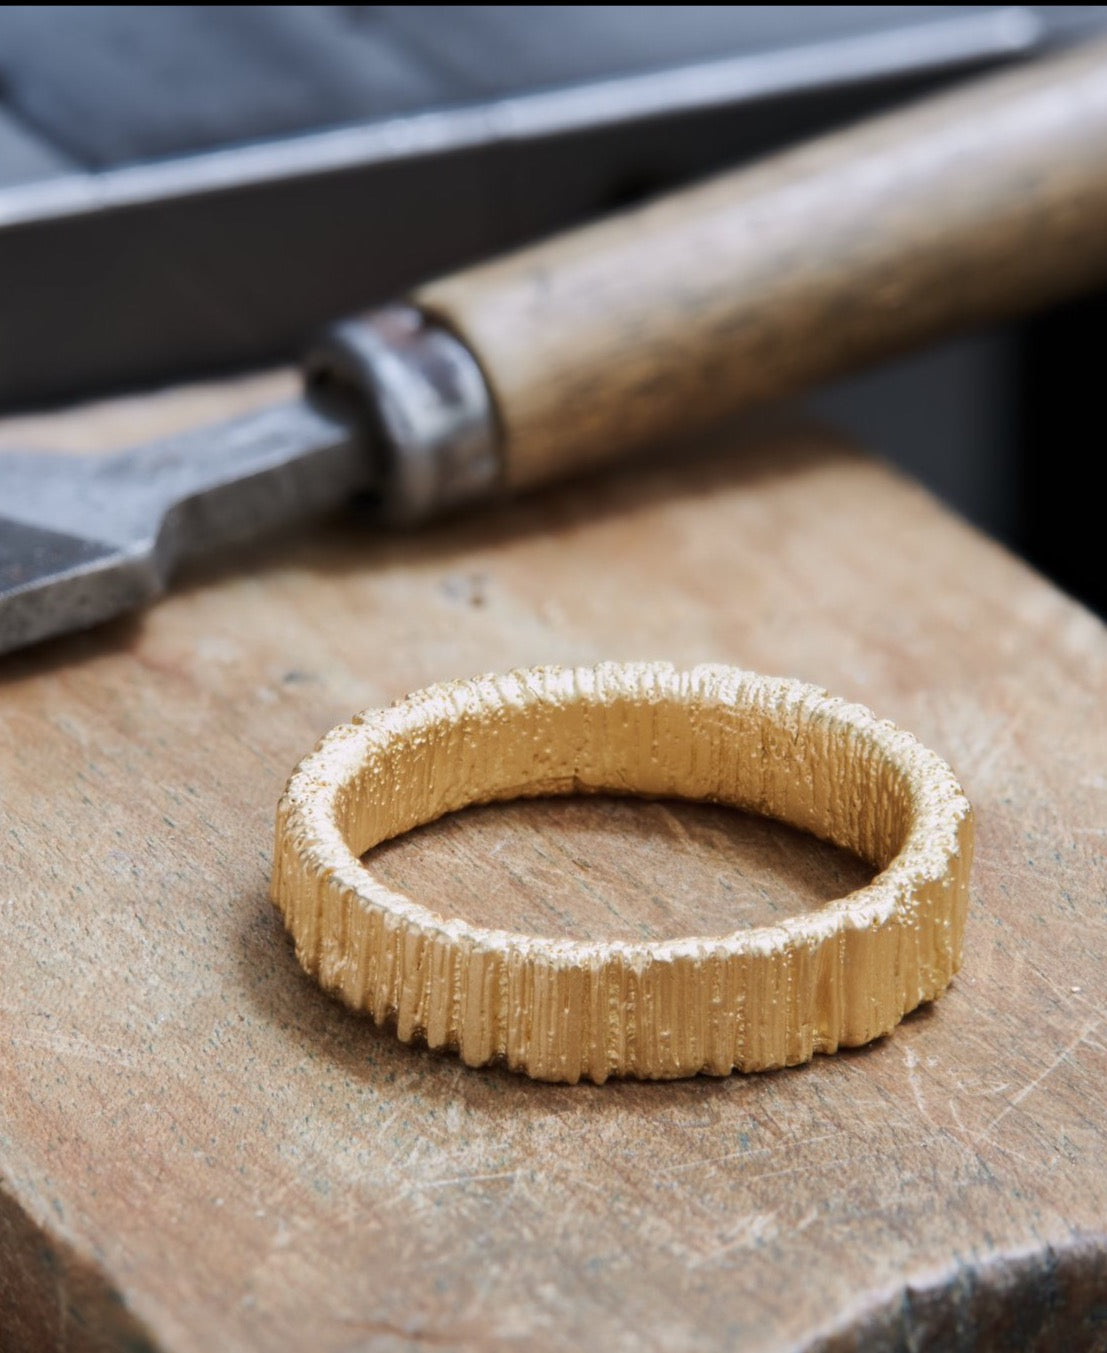 'Woodring No. 5' Fairtrade Gold Ring